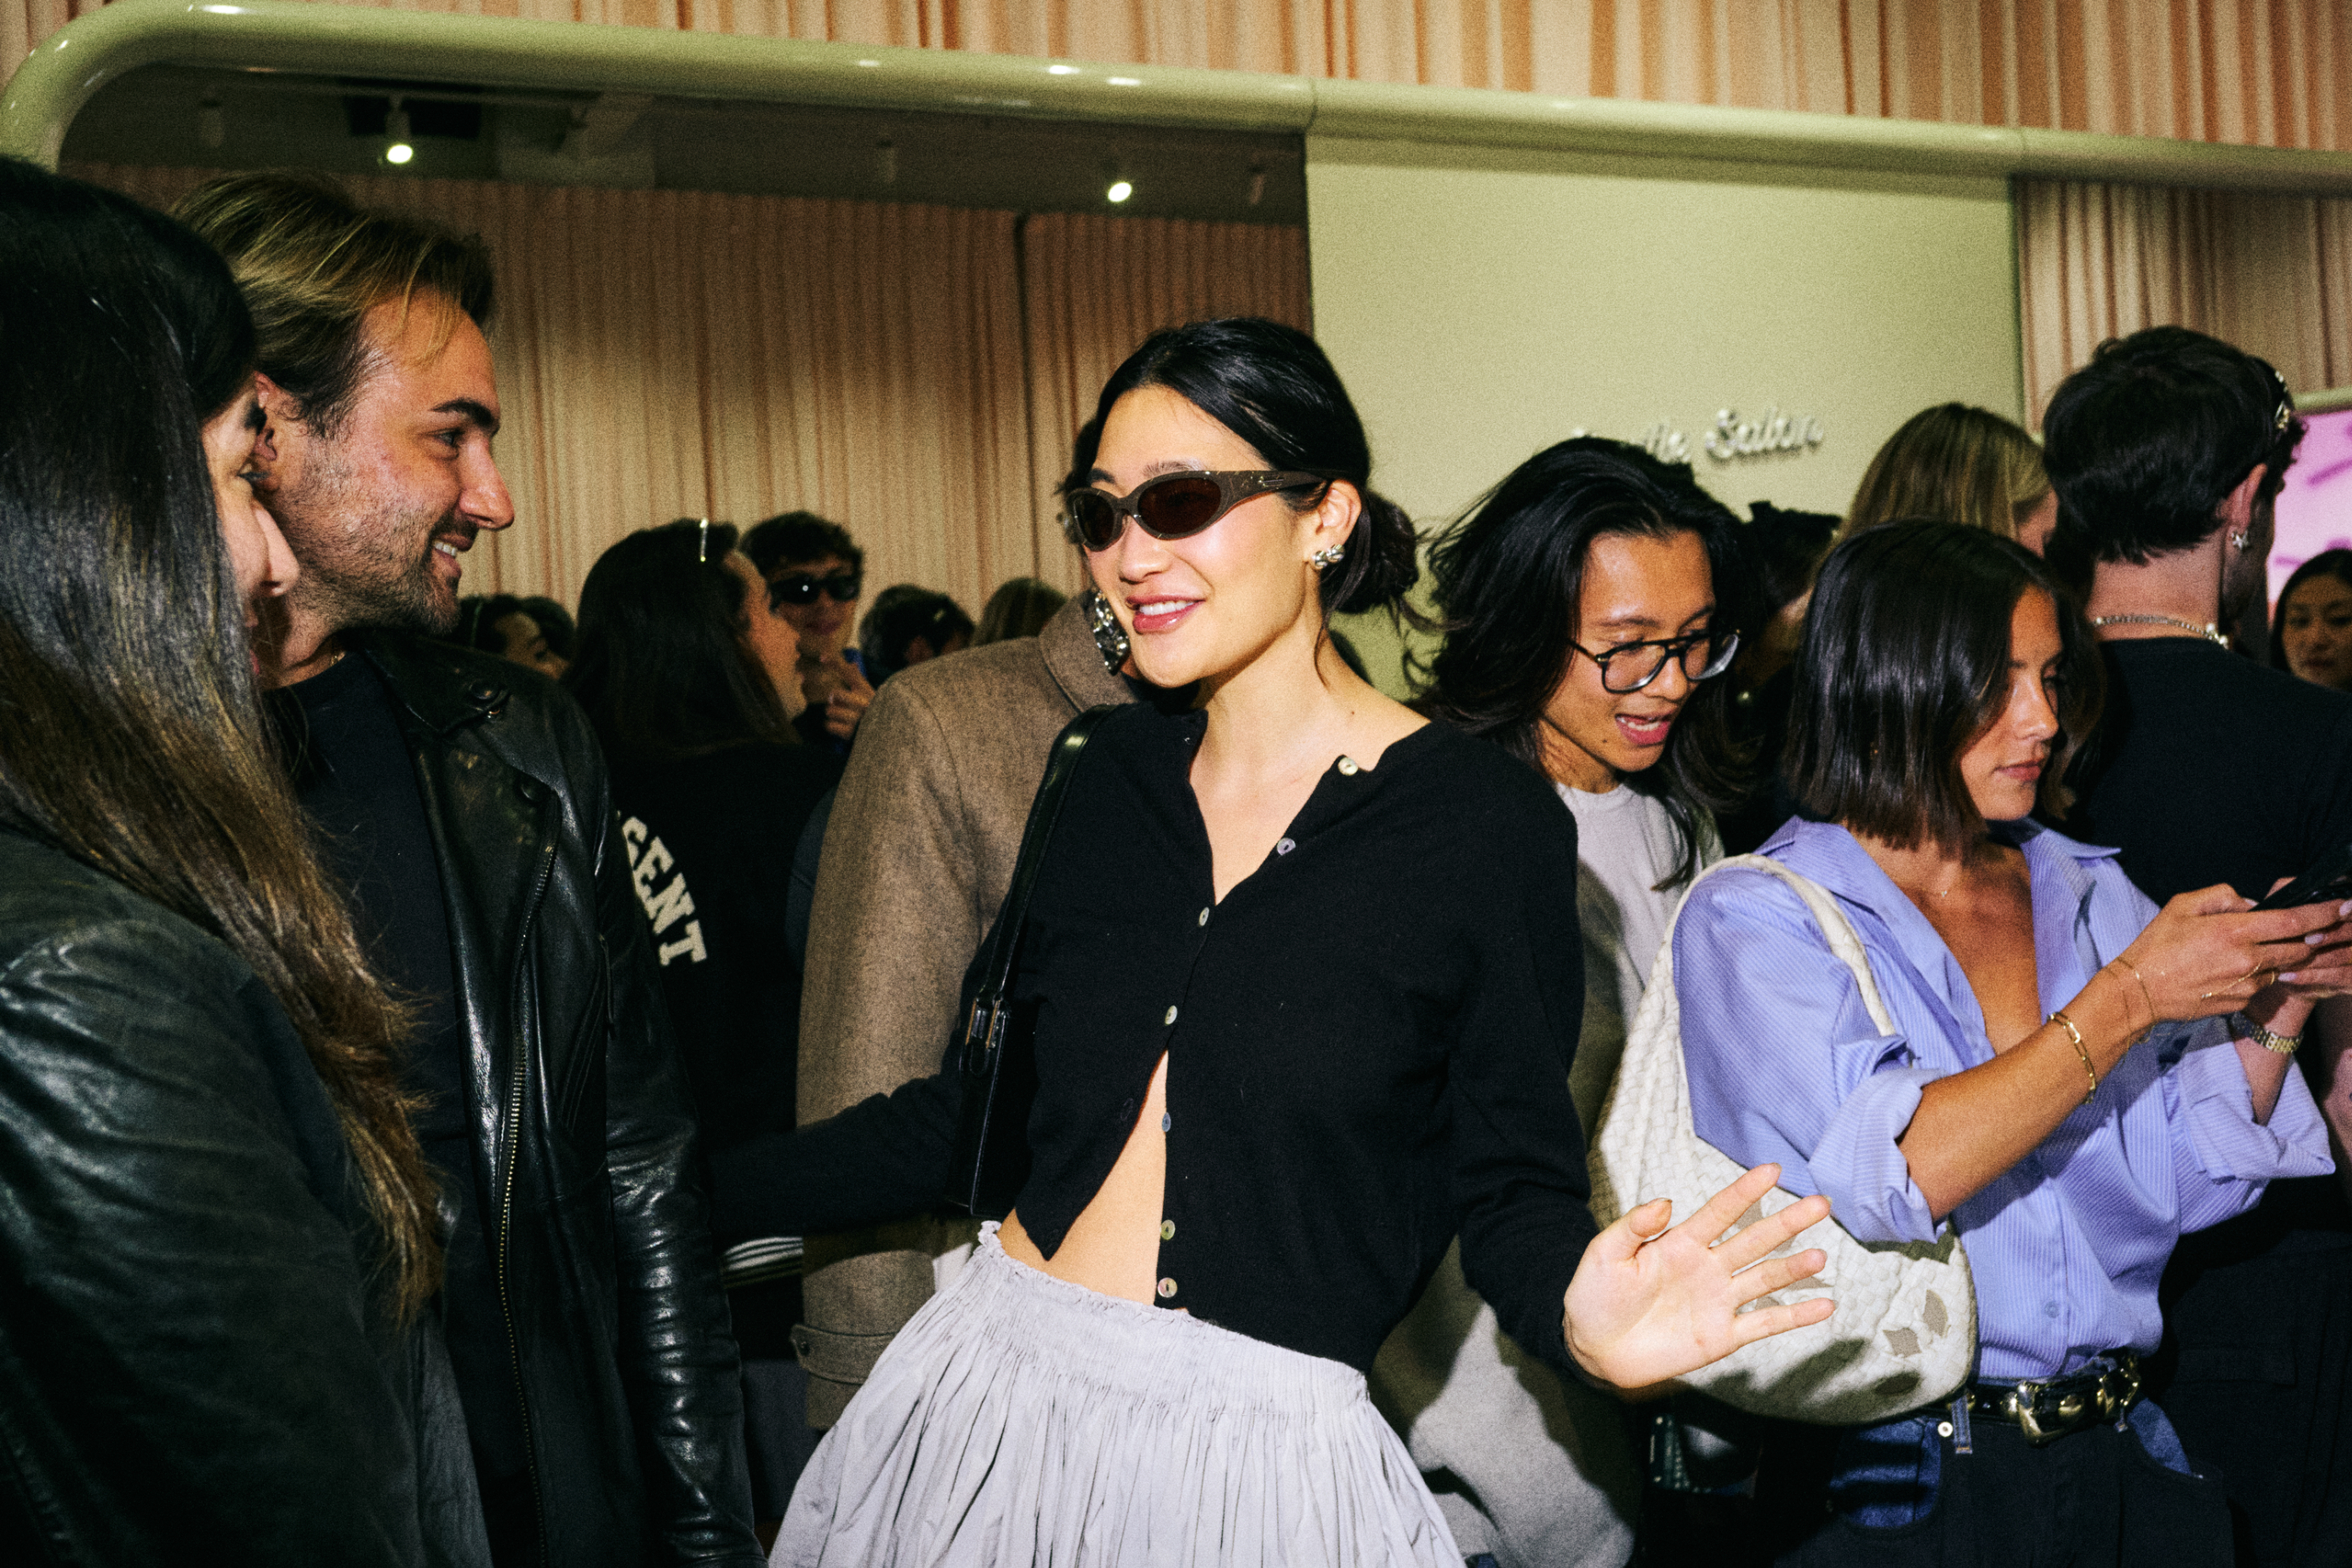 Woman in a chic black top and pleated skirt, sunglasses indoors, engaging with event attendees